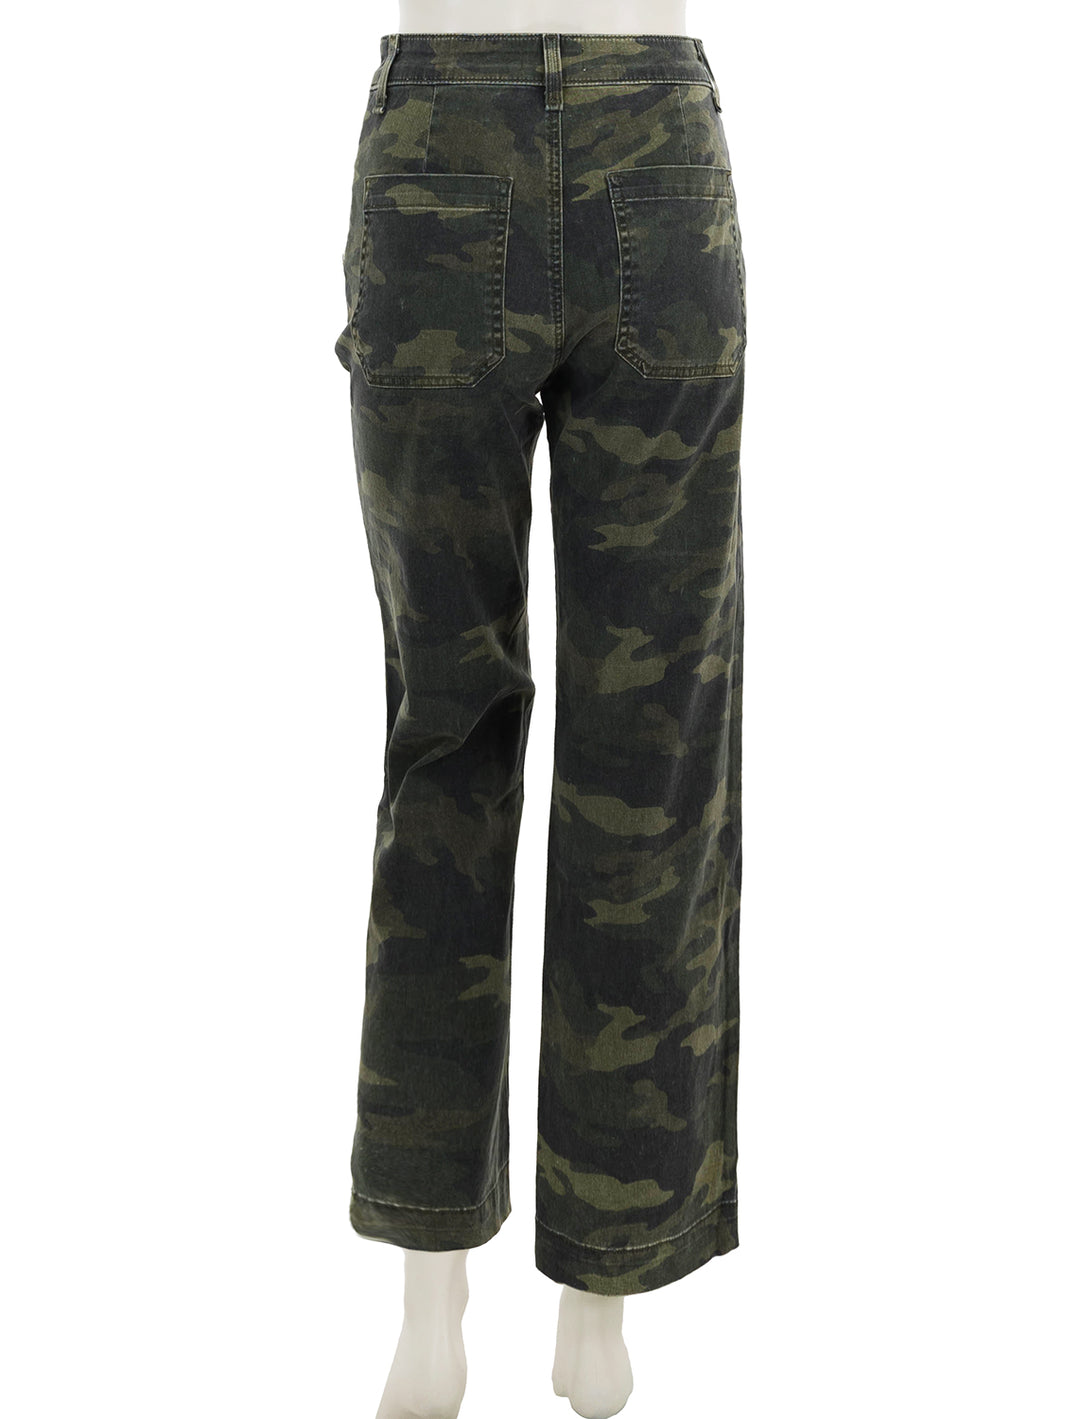 back view of sailor pant in camo